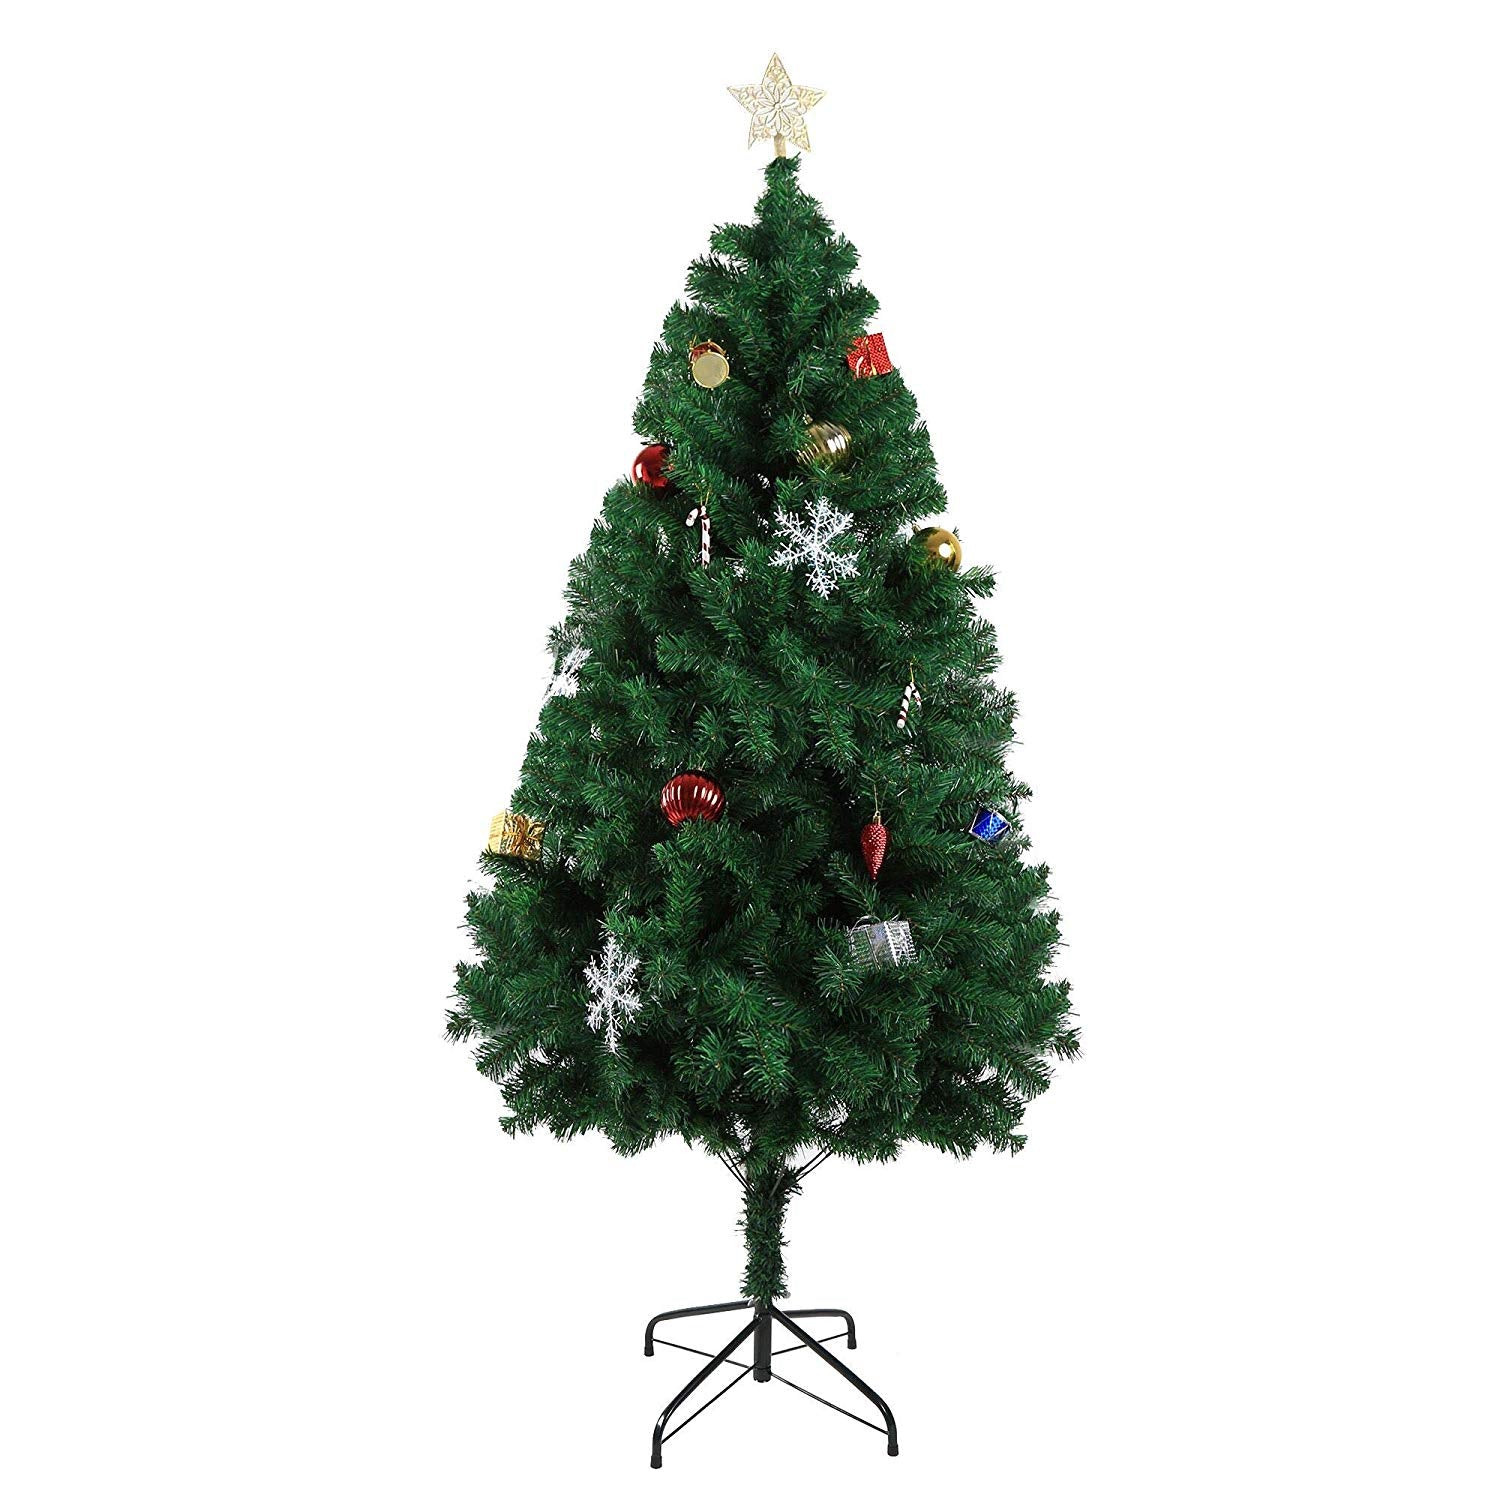 (Out of stock) 5' Premium Spruce Artificial Christmas Tree w/Metal Stand, Green